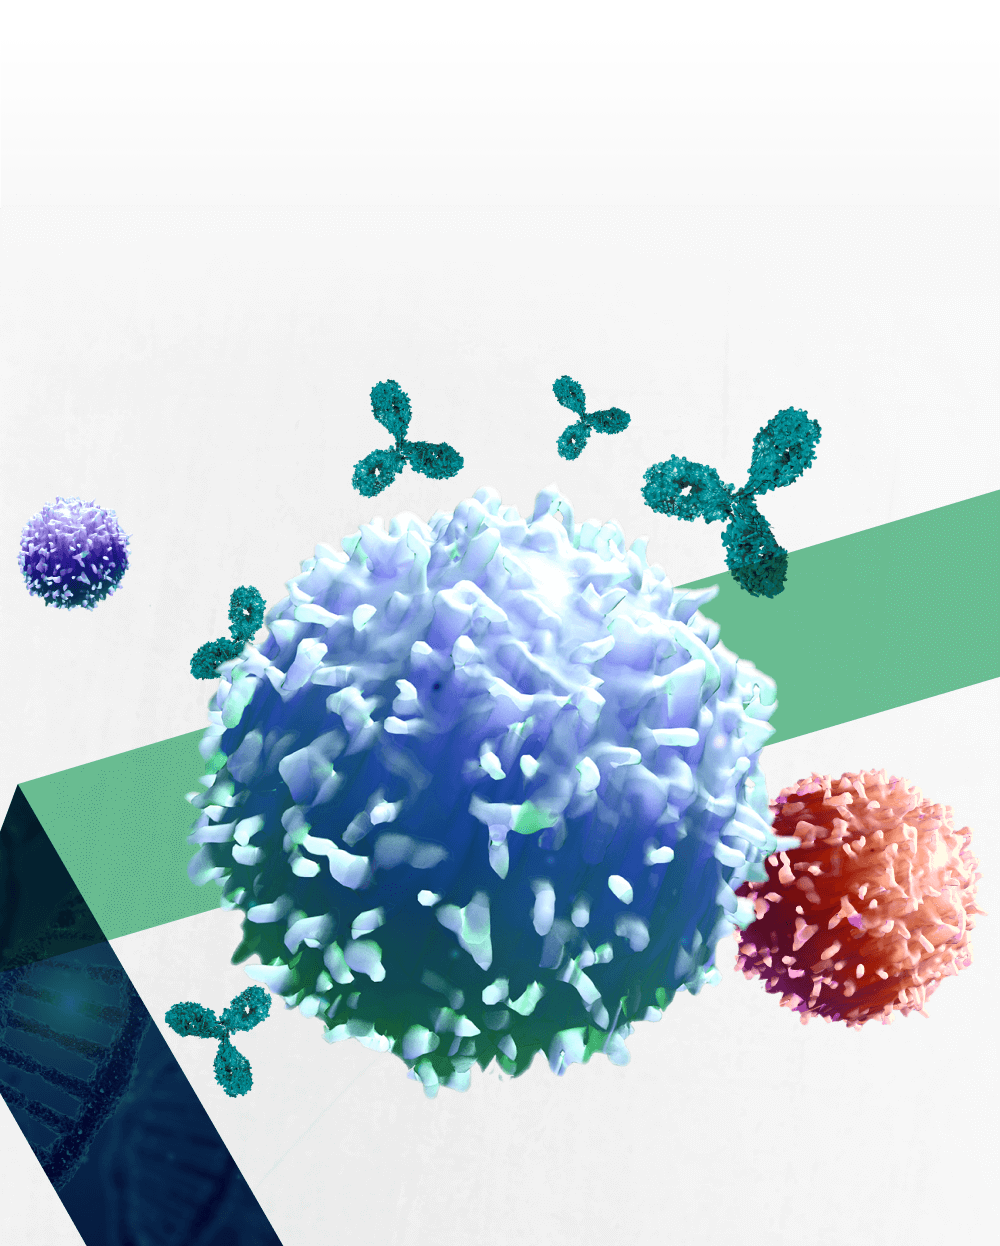 Three T-cells with several antibodies surrounding them.